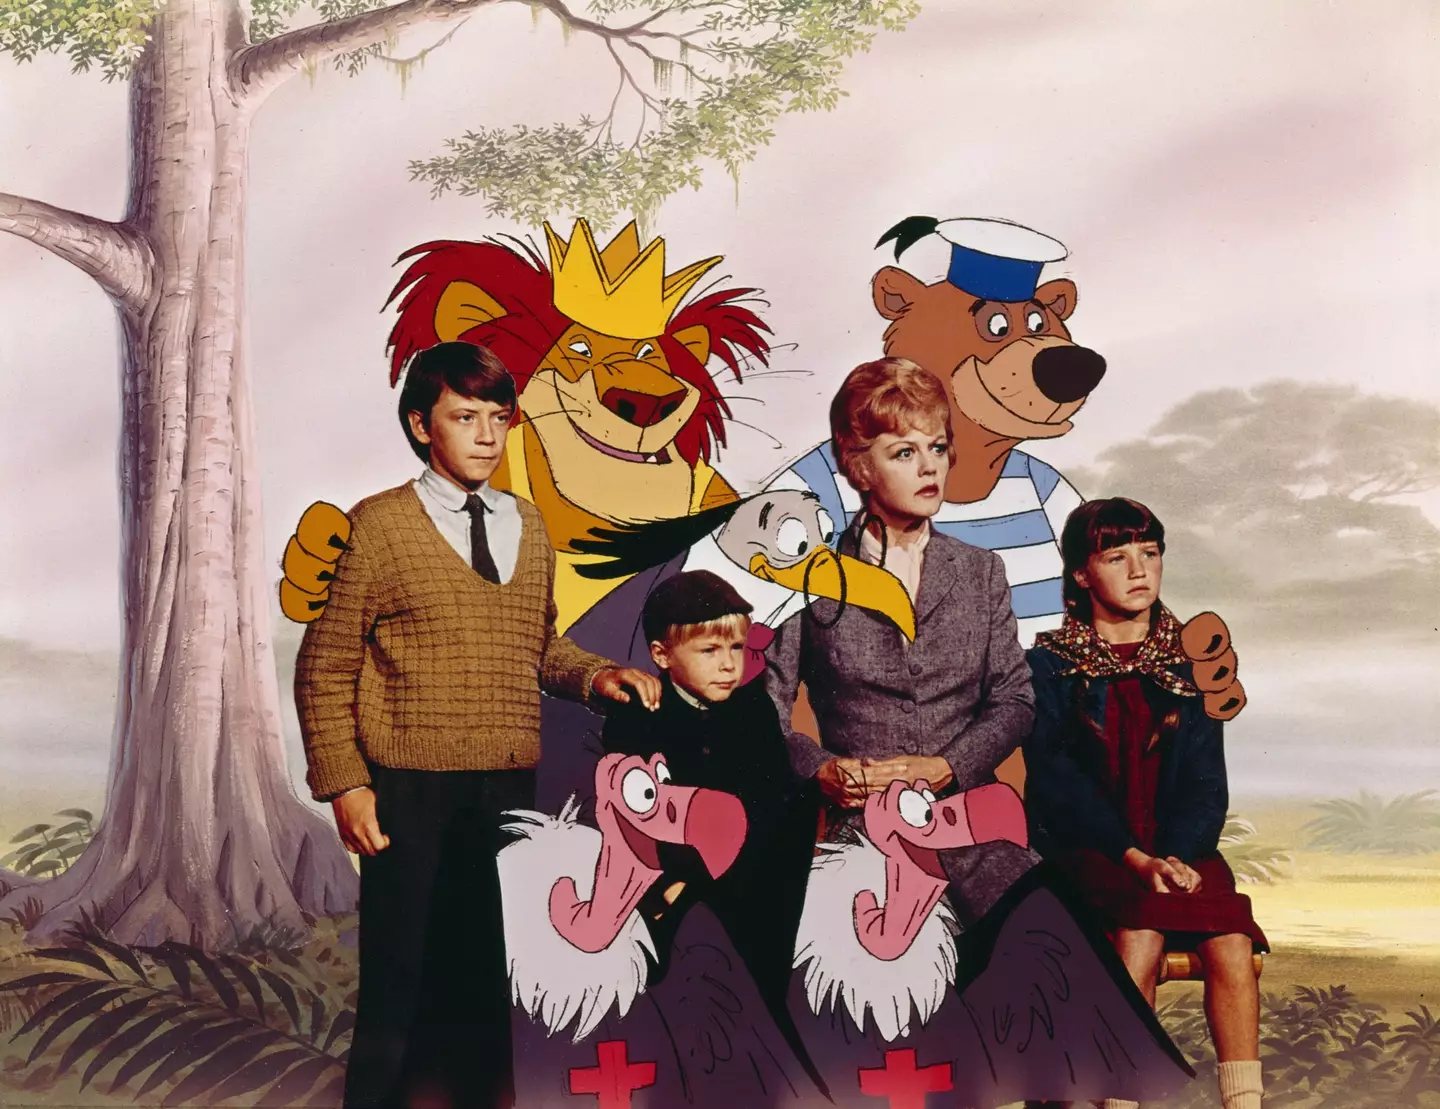 Angela Lansbury starred in 'Bedknobs and Broomsticks'.